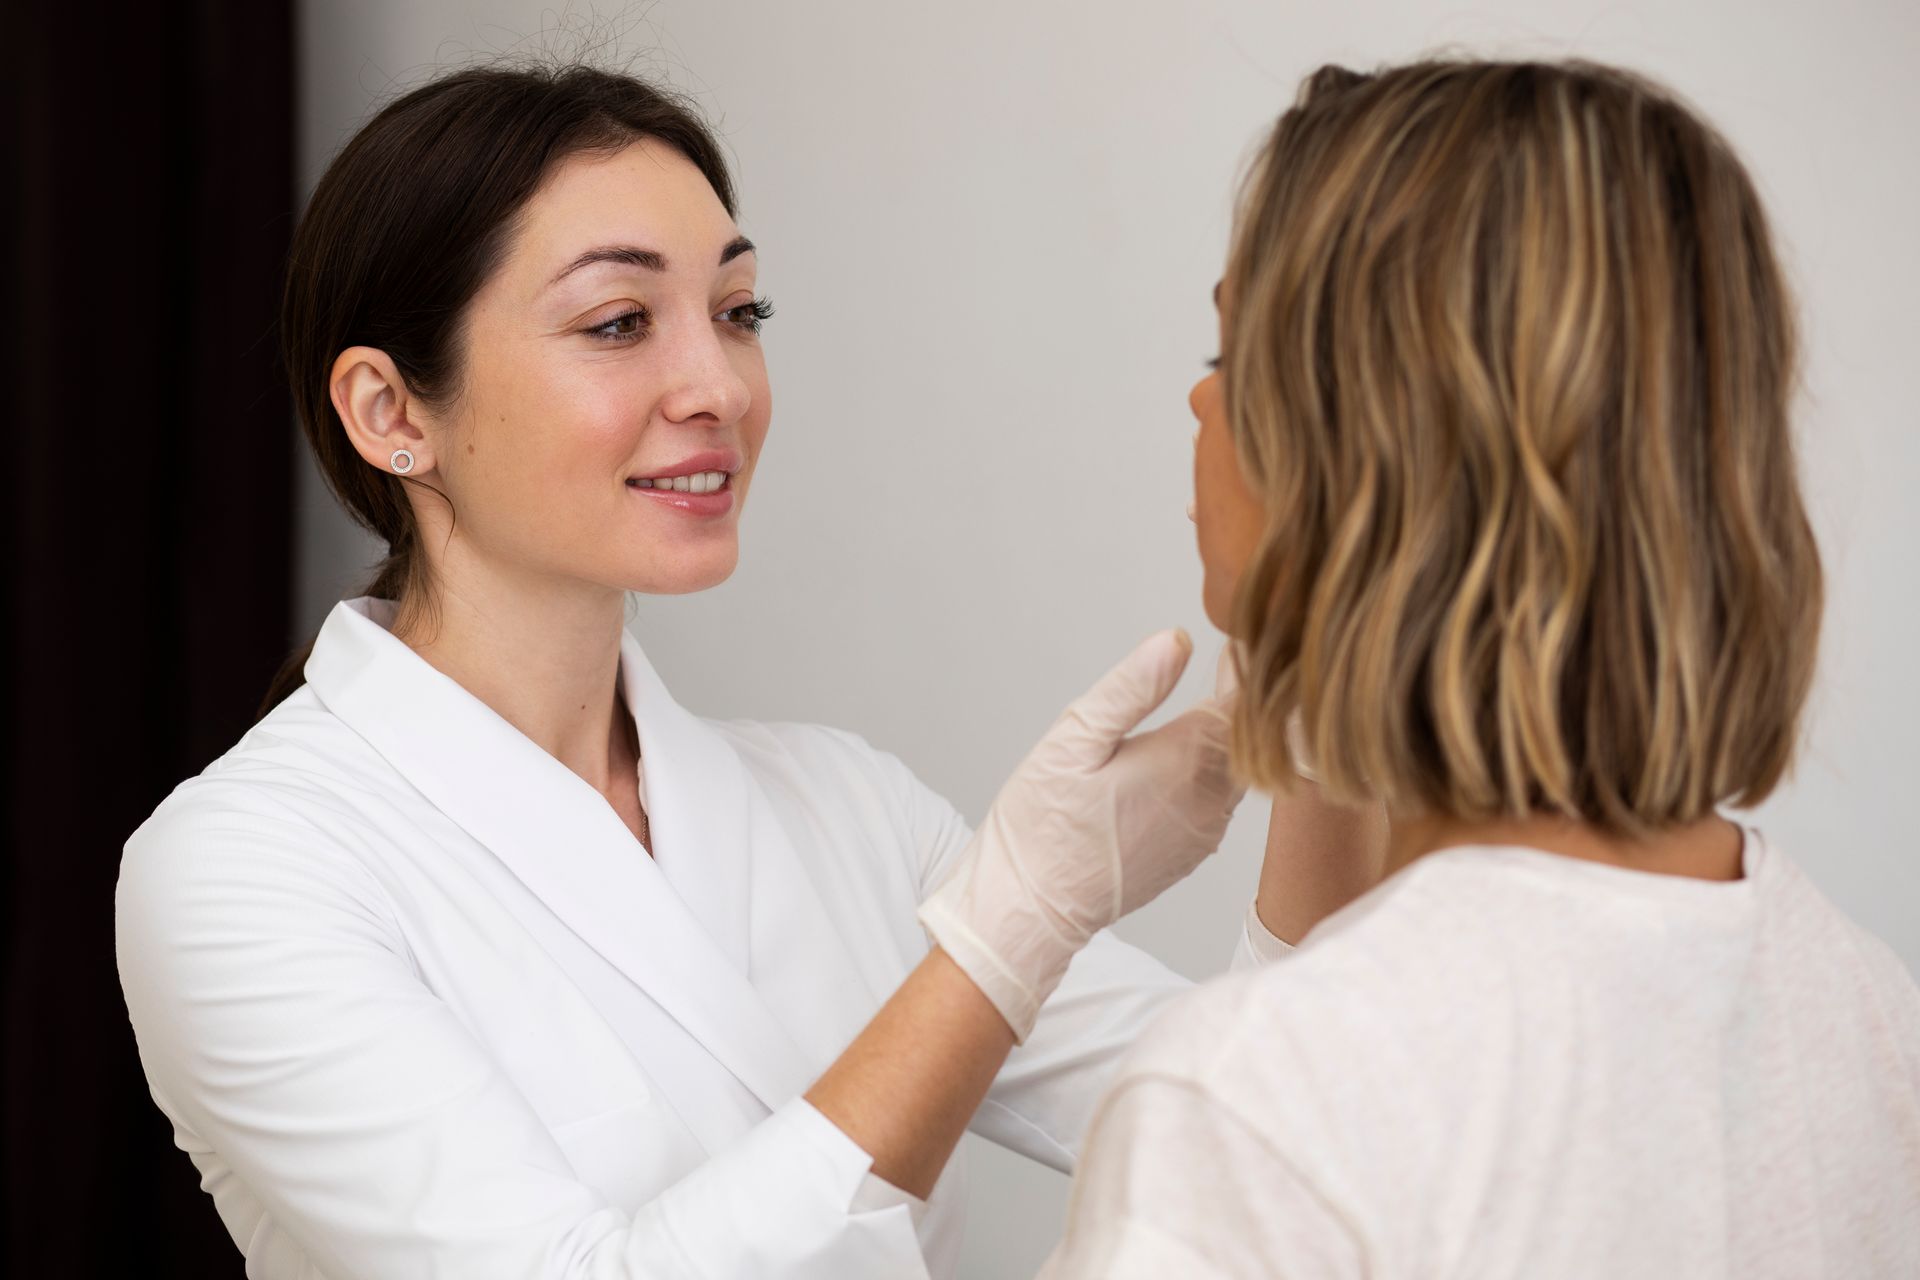 a woman in a white coat is examining another woman 's face